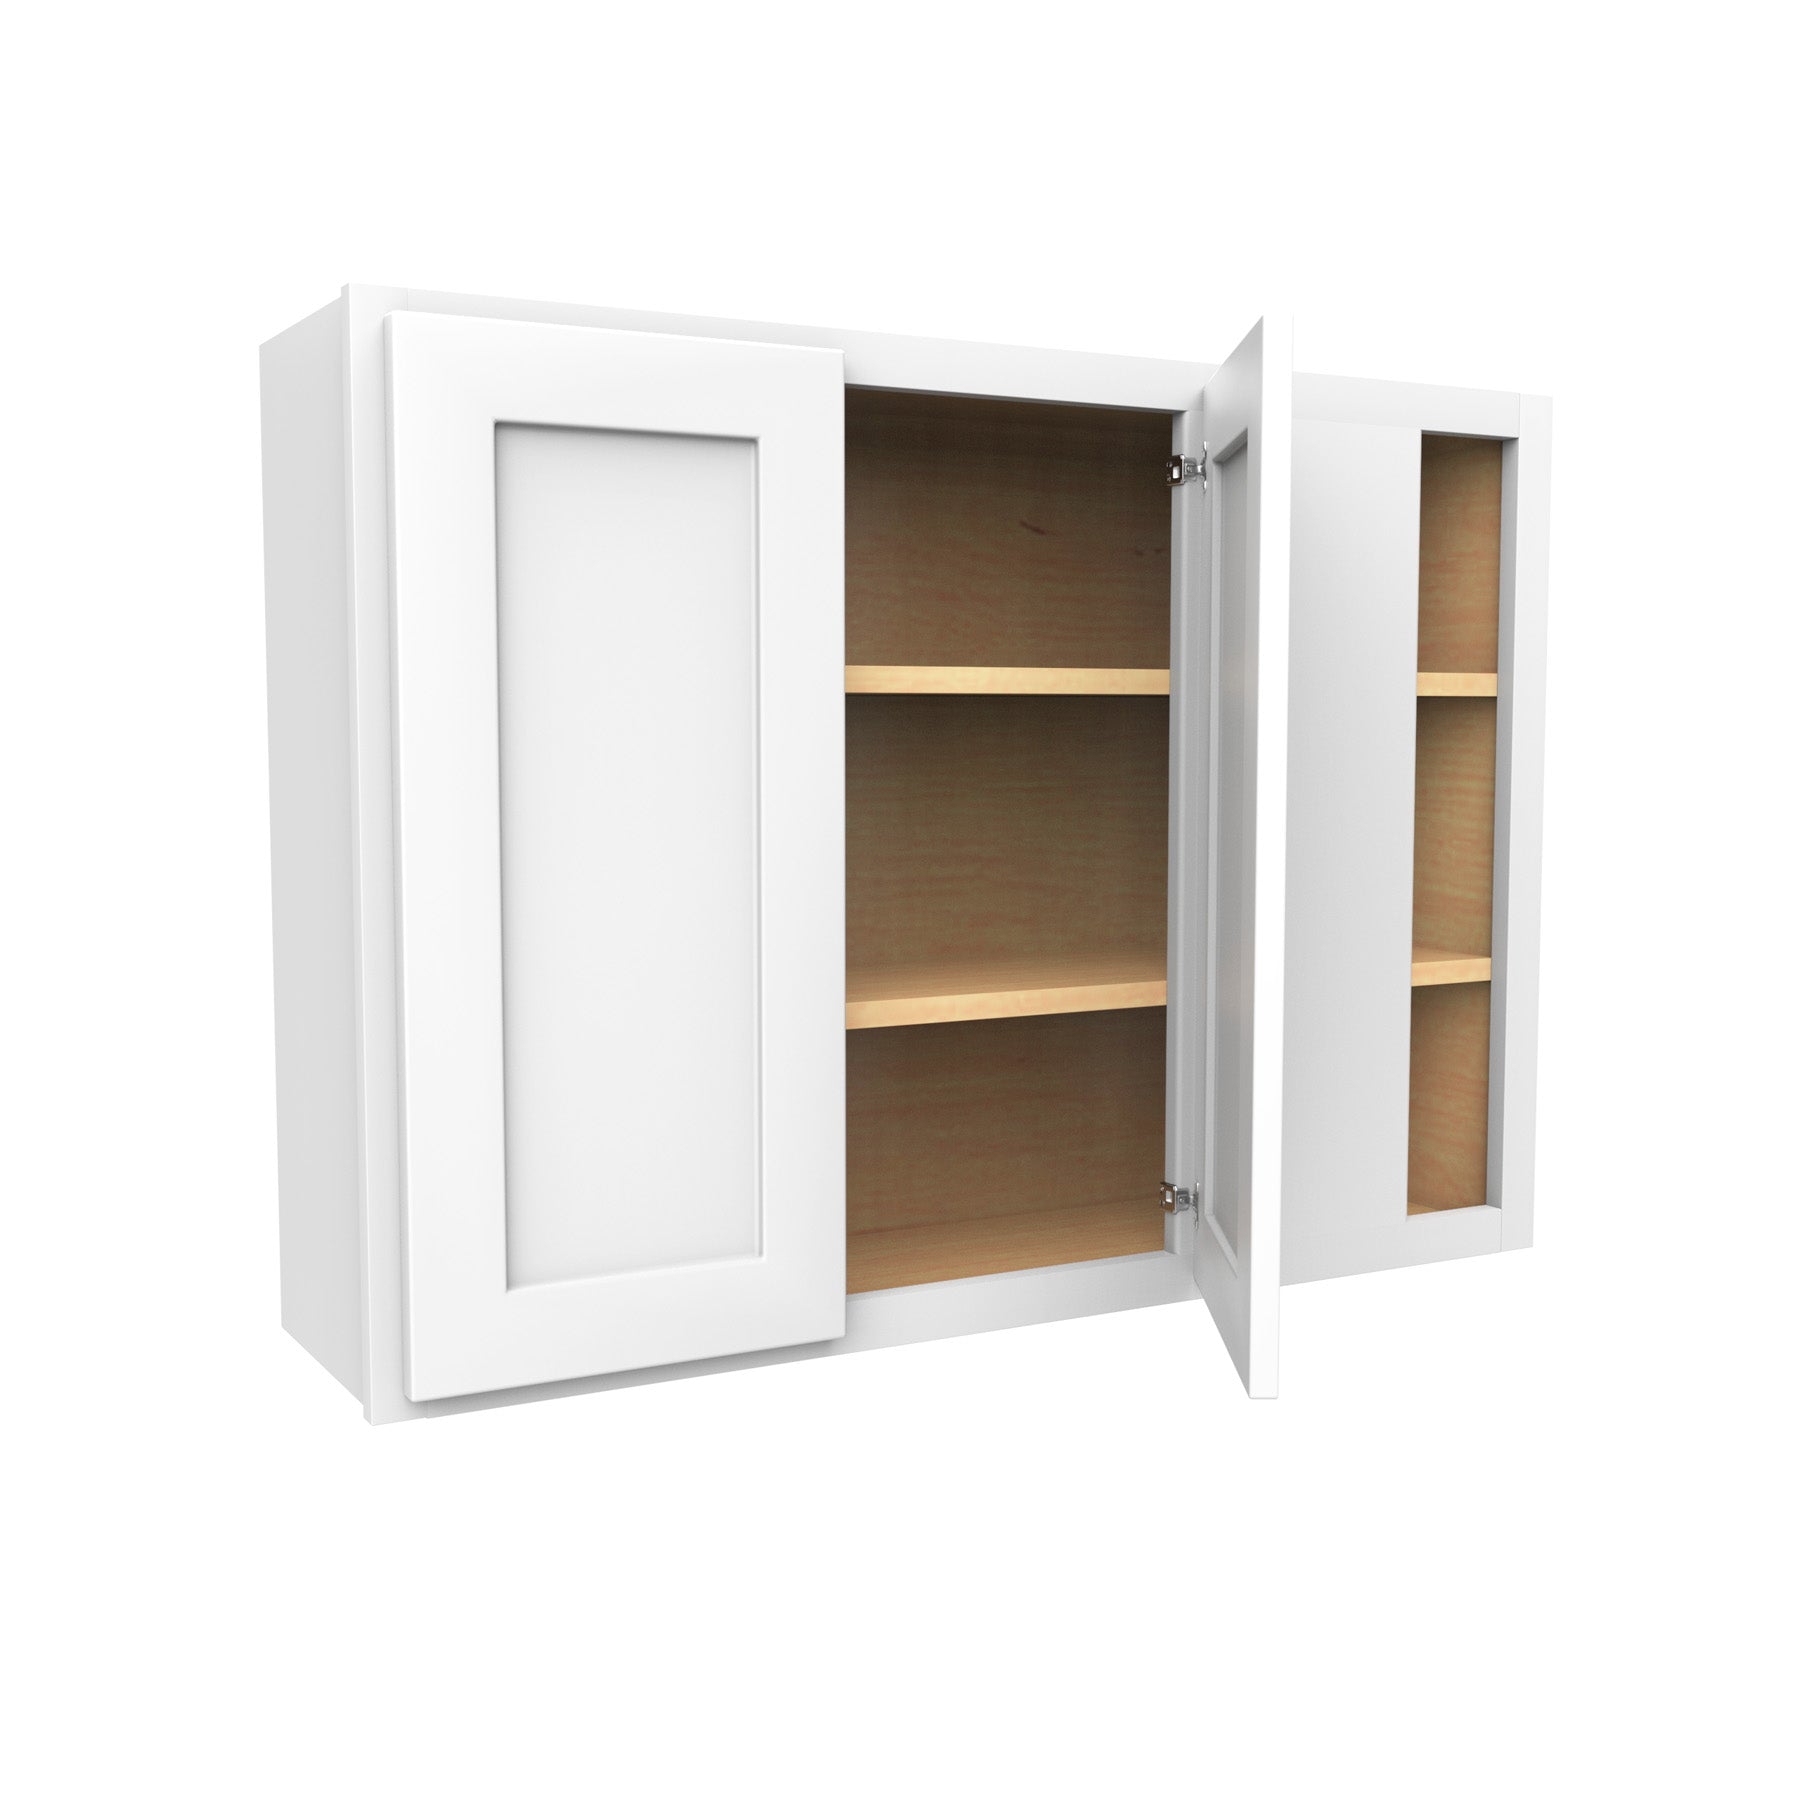 Luxor White - Blind Wall Cabinet | 42"W x 30"H x 12"D